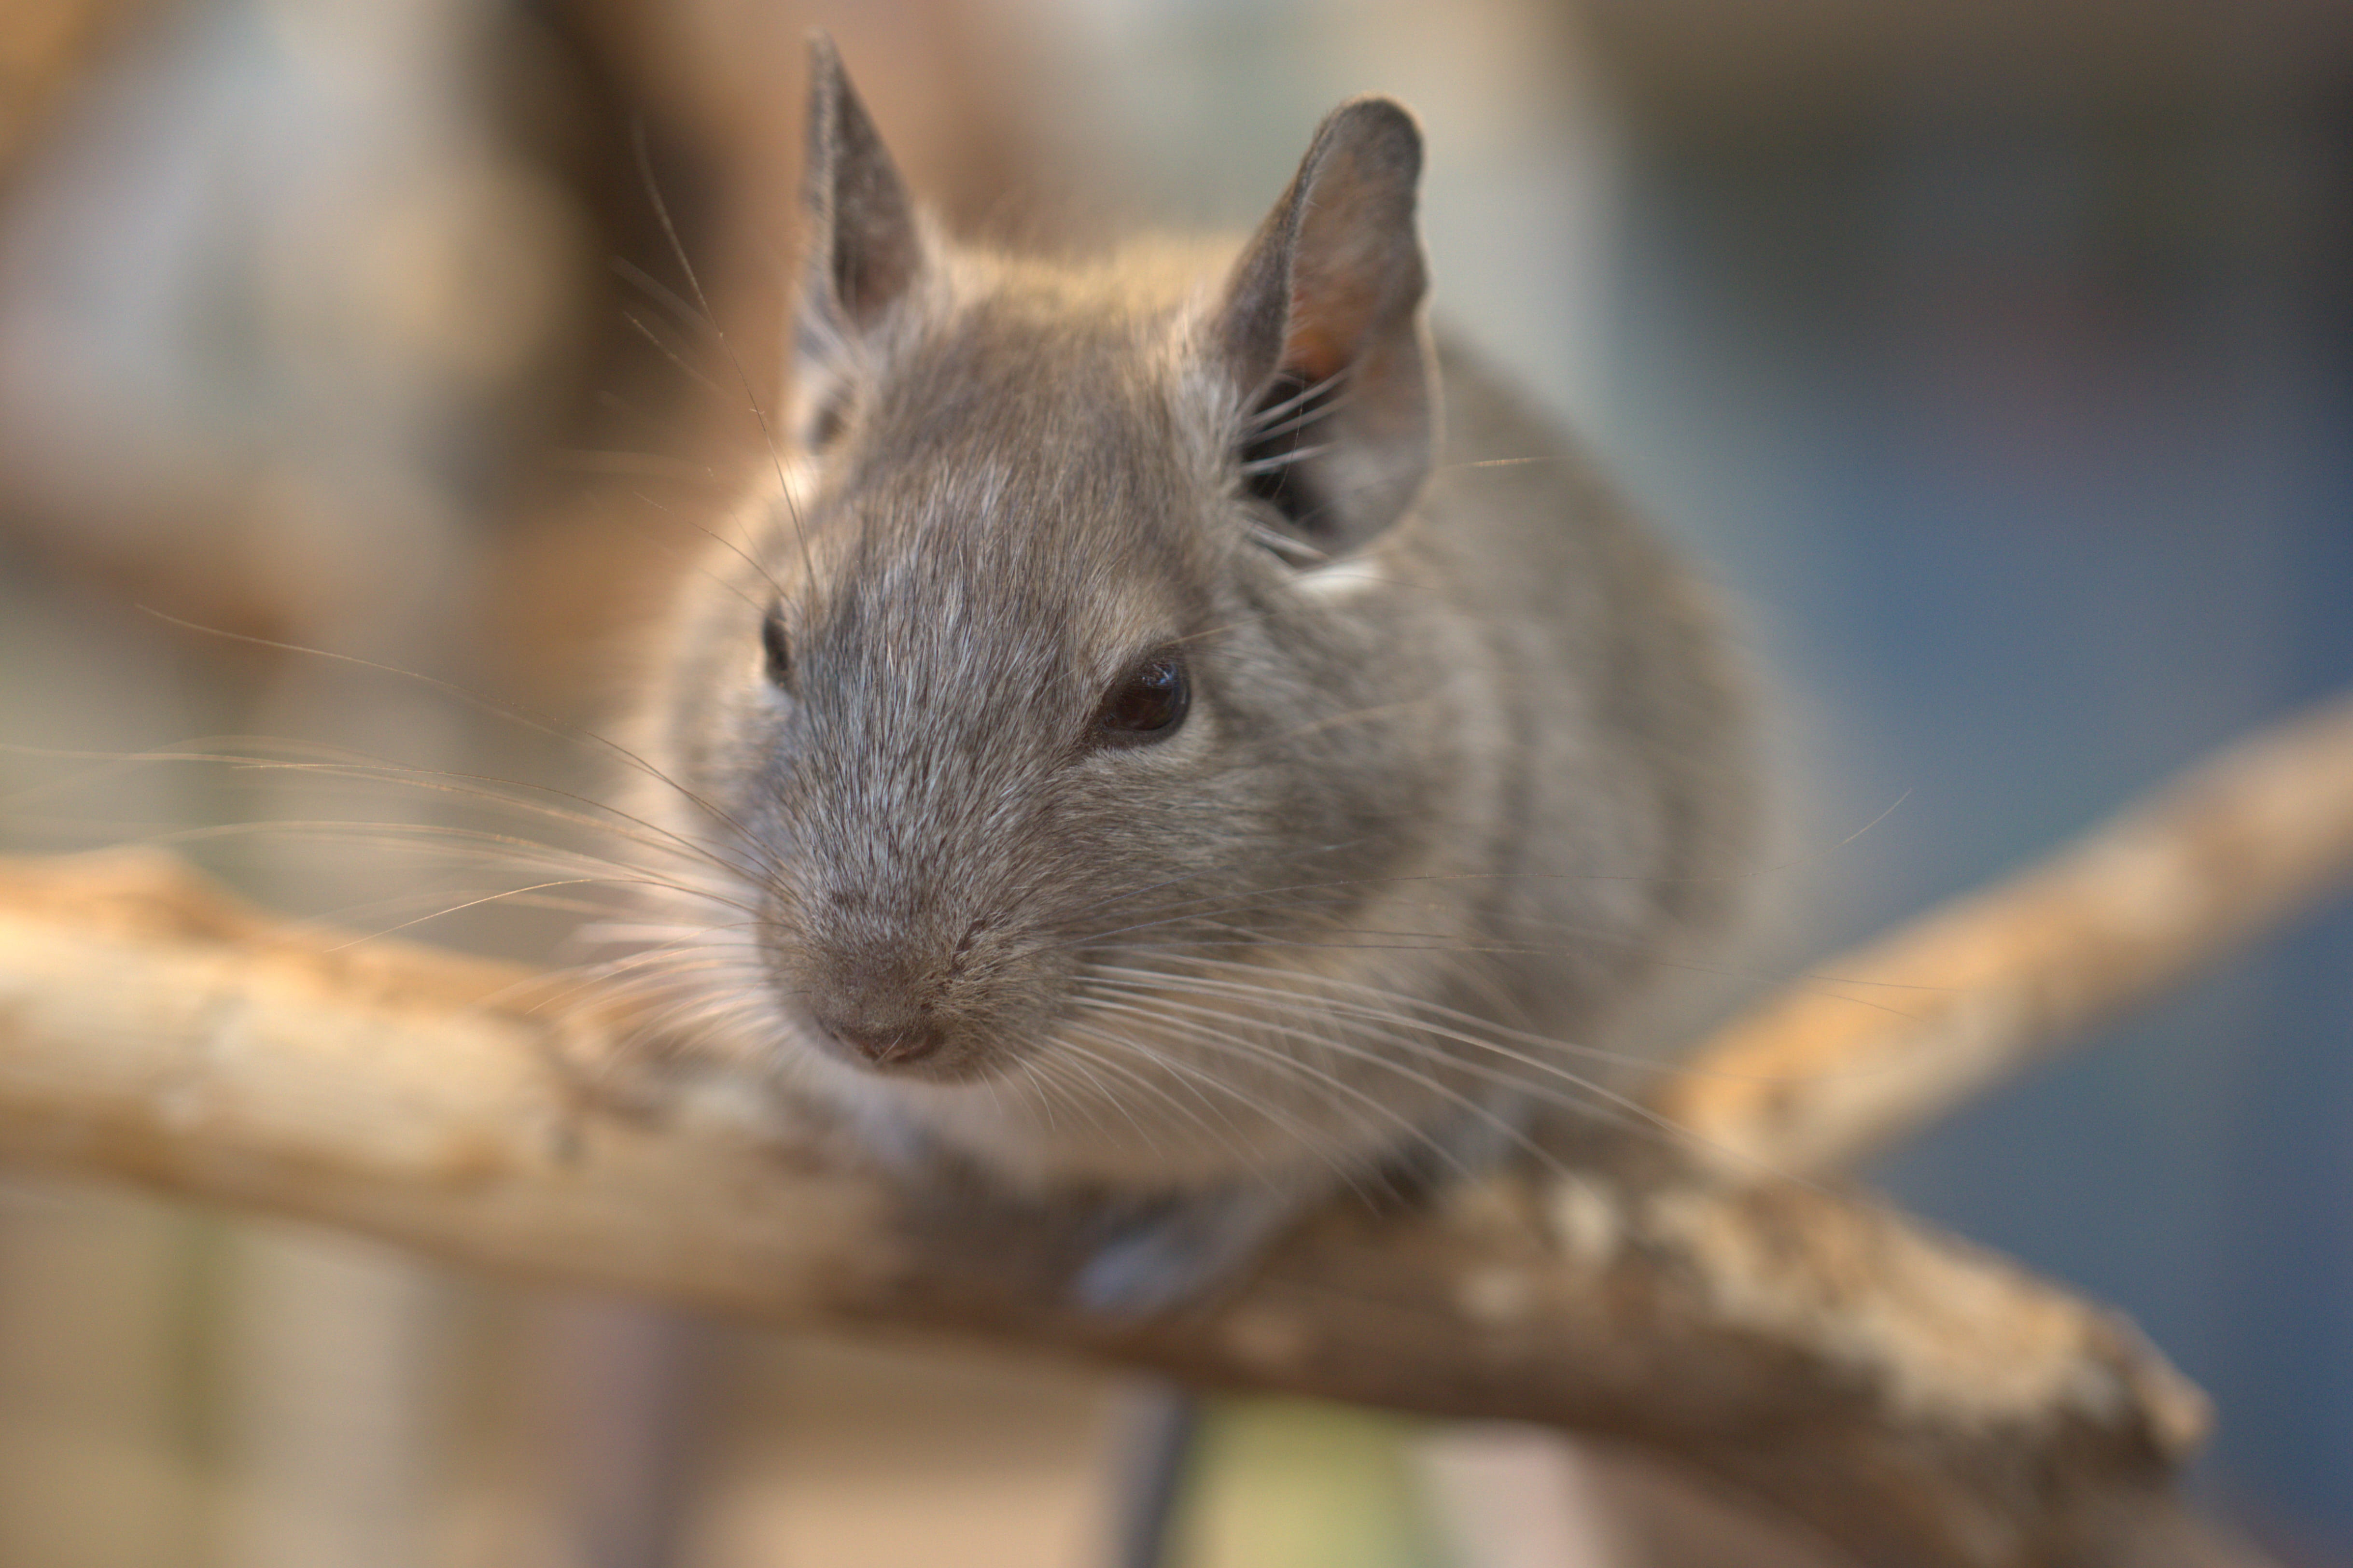 nager, chinchilla, mouse, grey, cute, animal, small, fur, nature